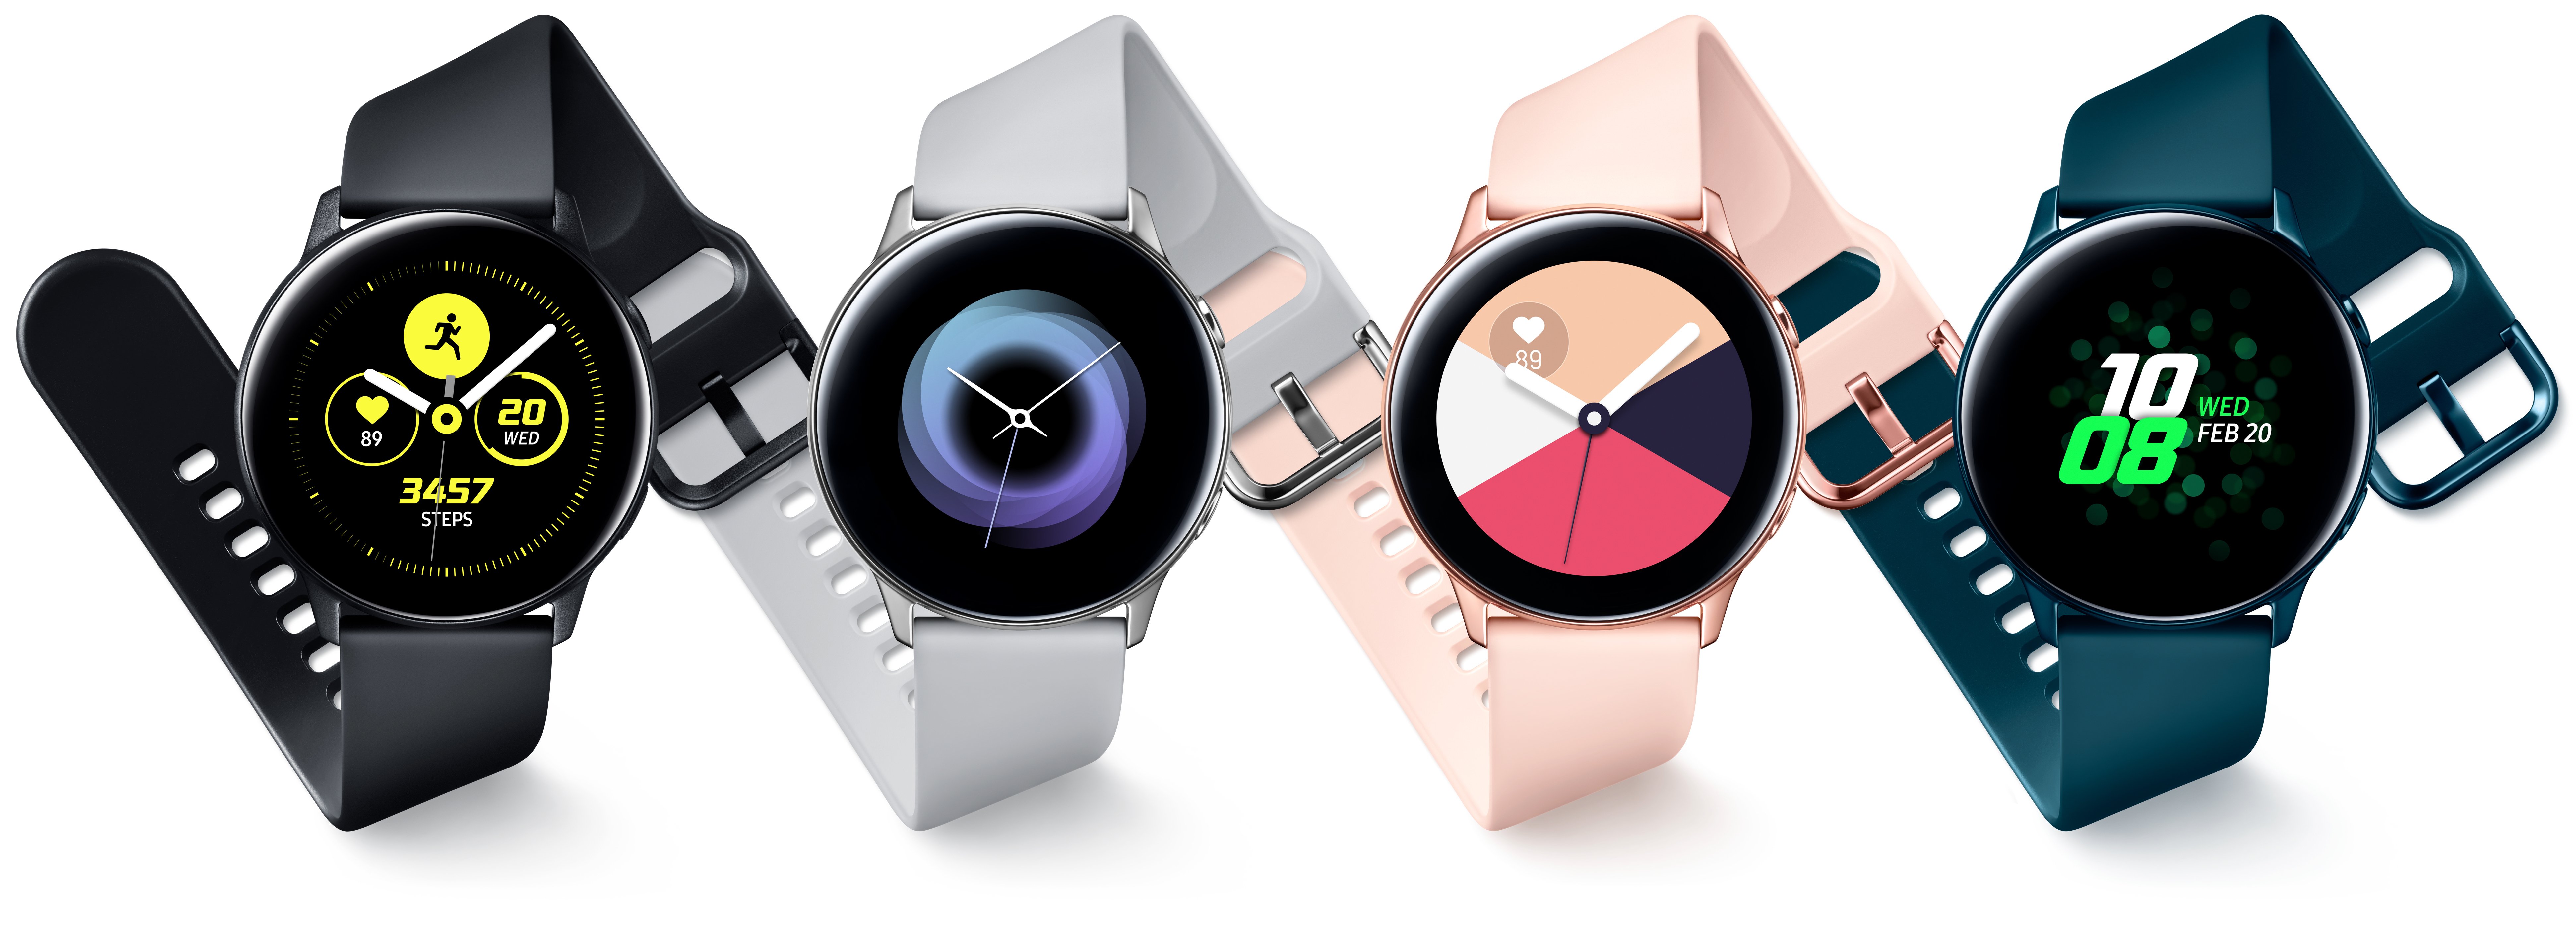 Galaxy watch active colors